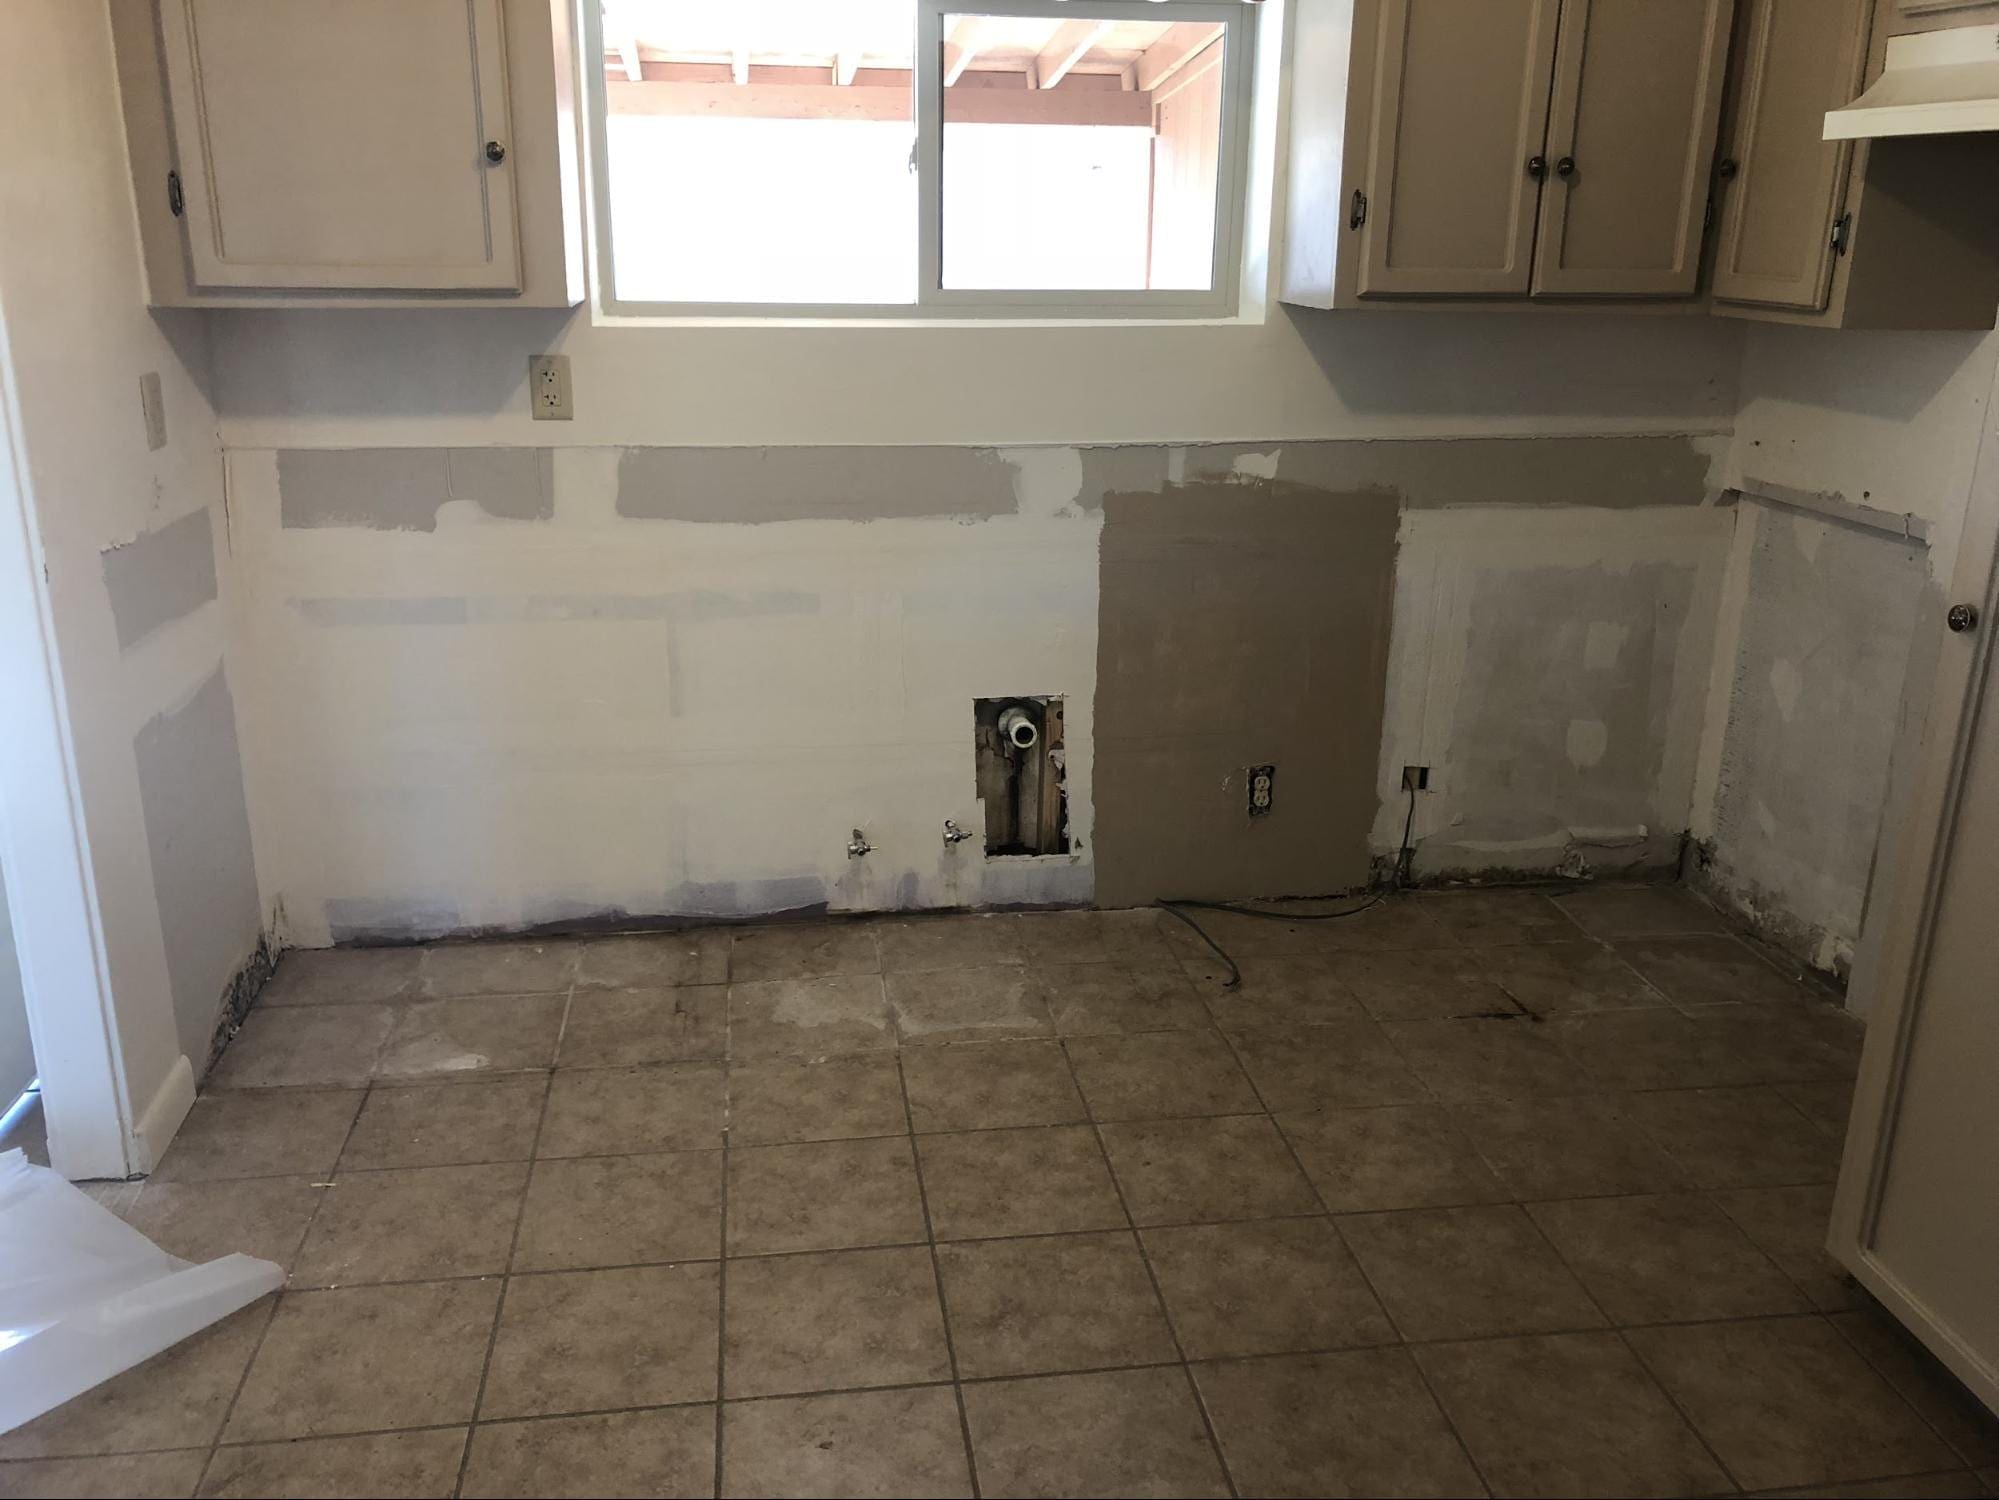 Water Damage Cleanup & Mold Remediation in Tucson